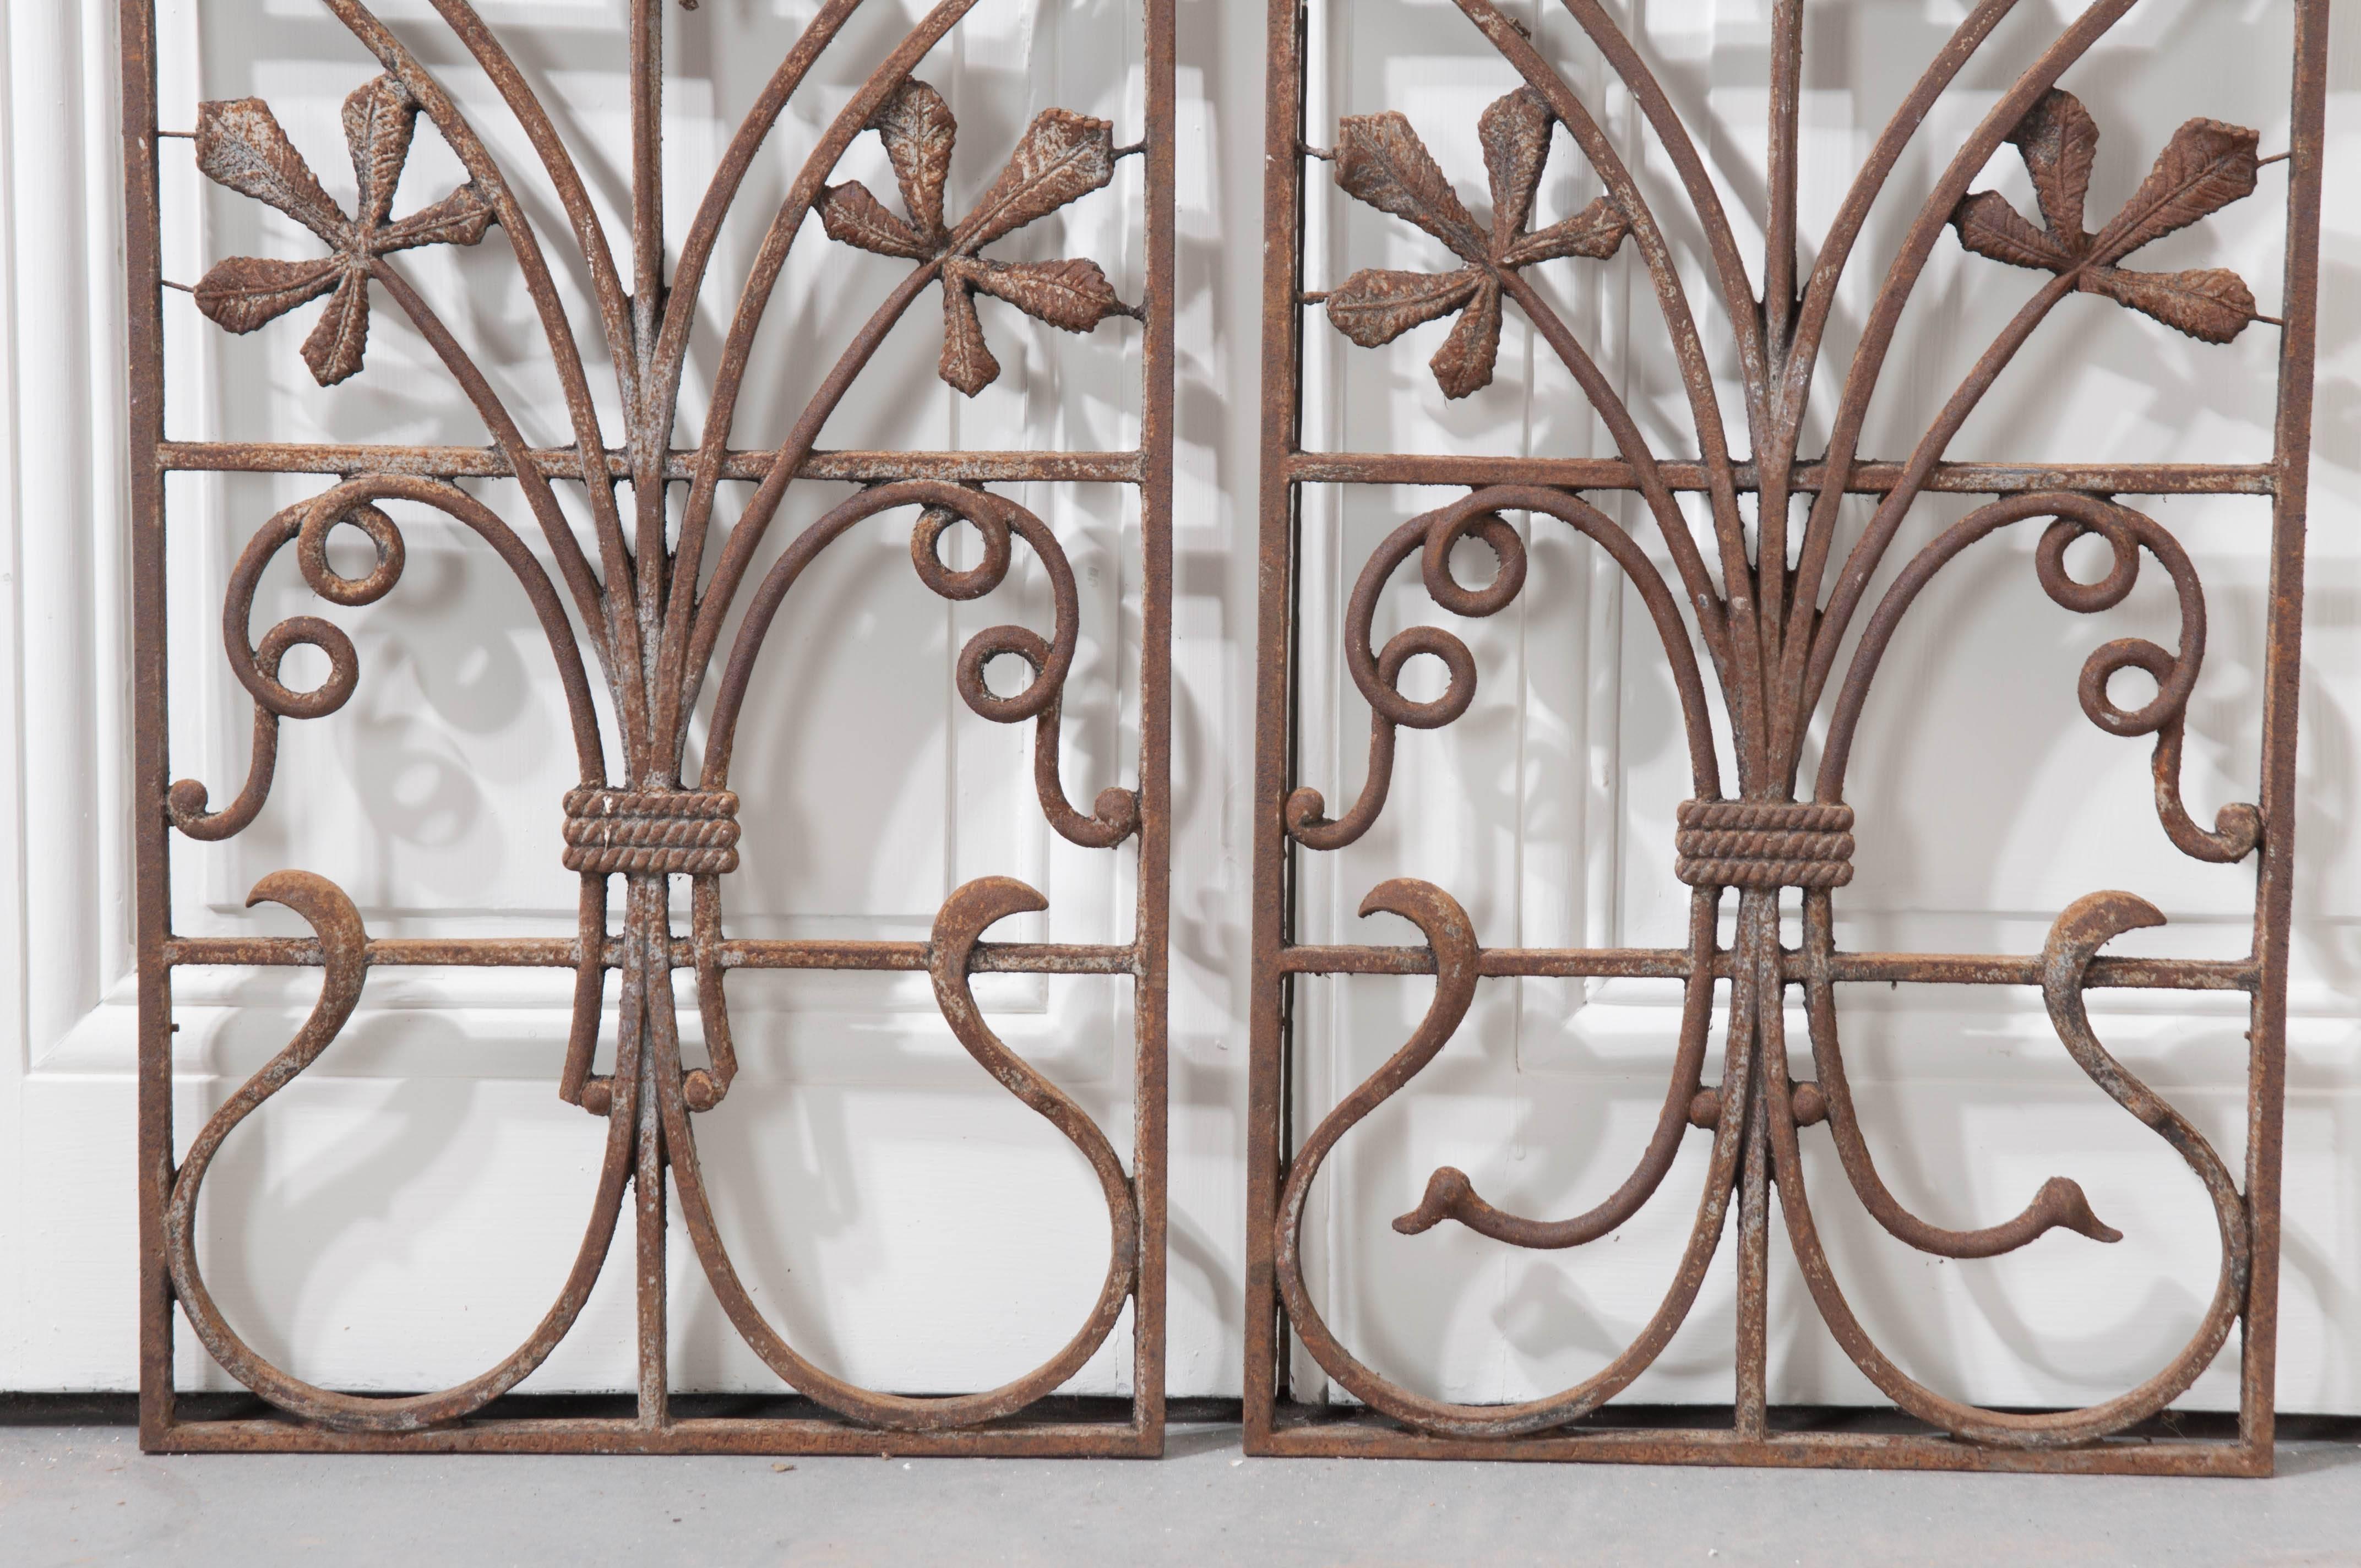 Patinated Pair of Early 20th Century Art Nouveau Wrought Iron Panels